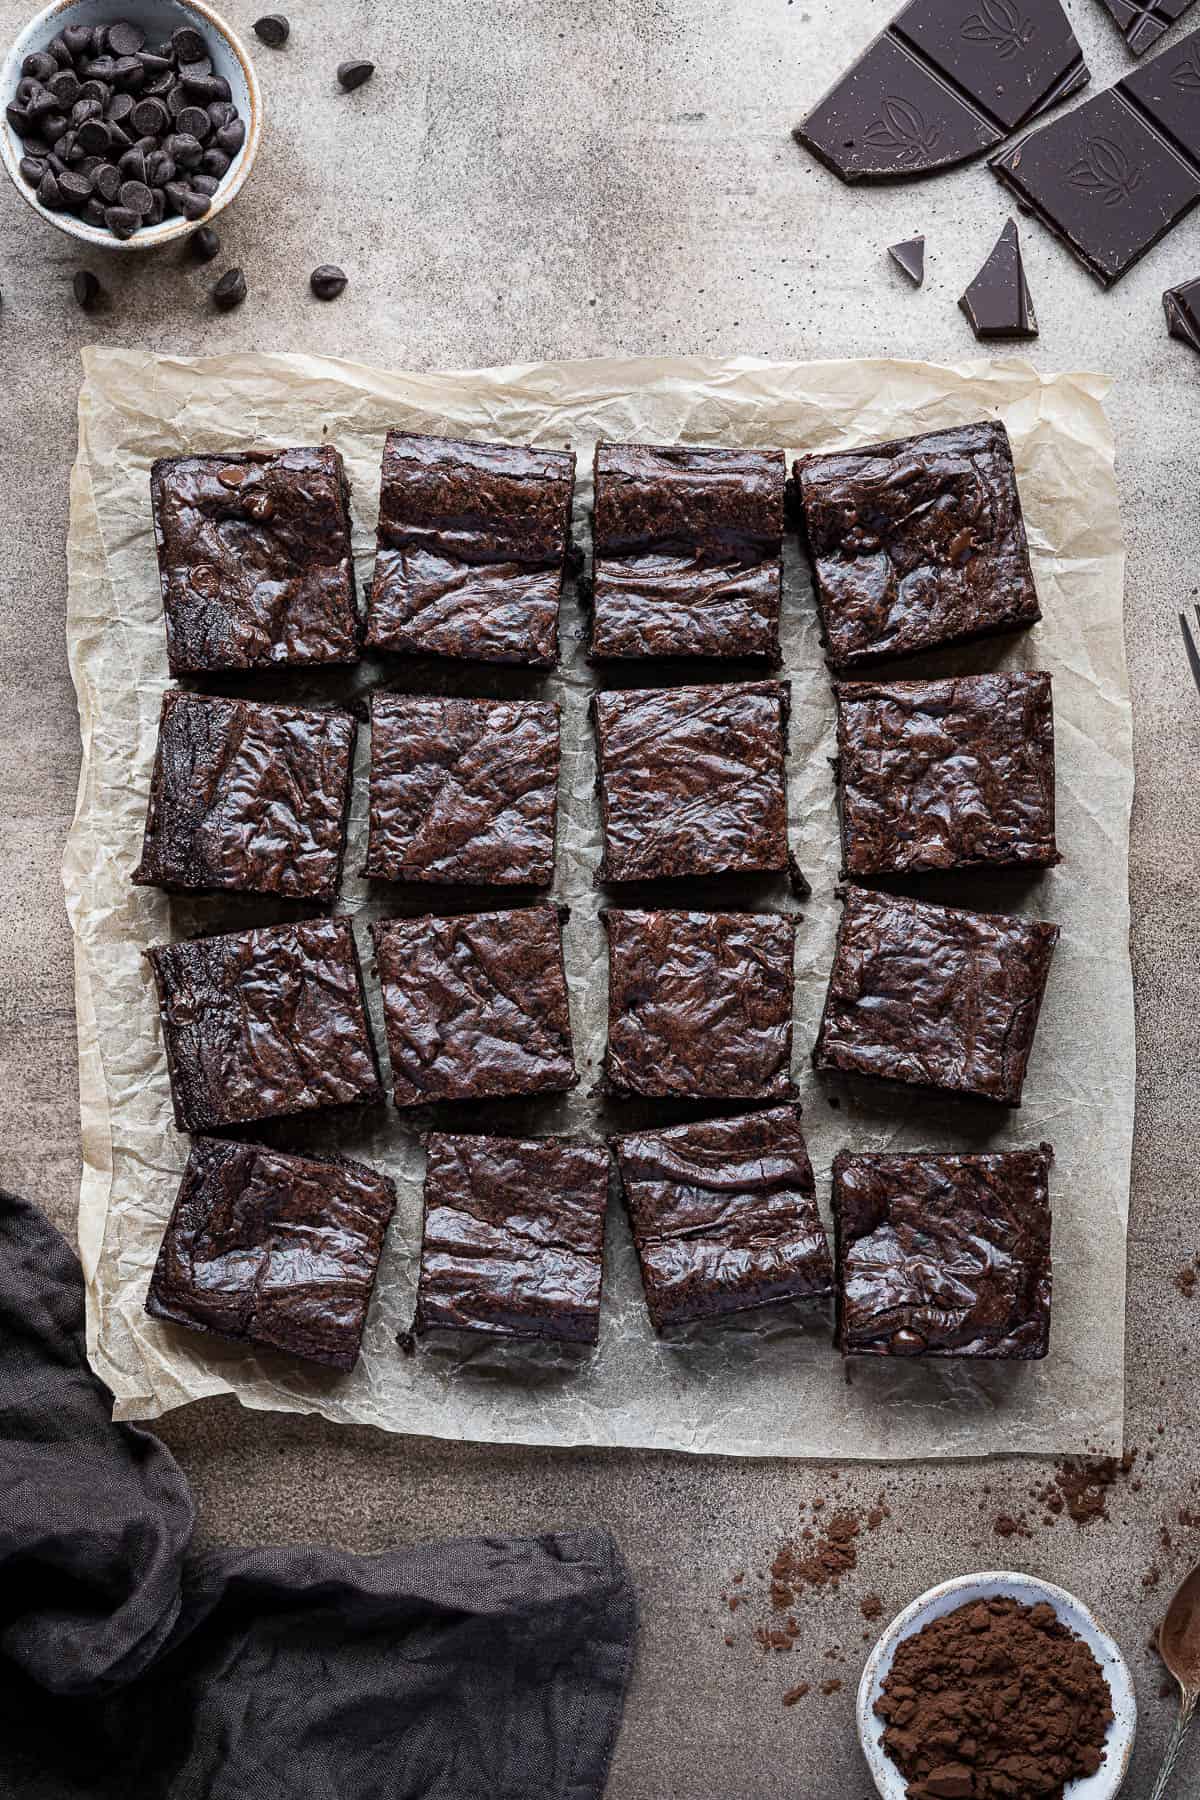 Fudgy vegan brownies on a sheet of baking parchment on a brown surface, surrounded by bowls of chocolate chips and cocoa powder, a broken bar of chocolate and a brown cloth.